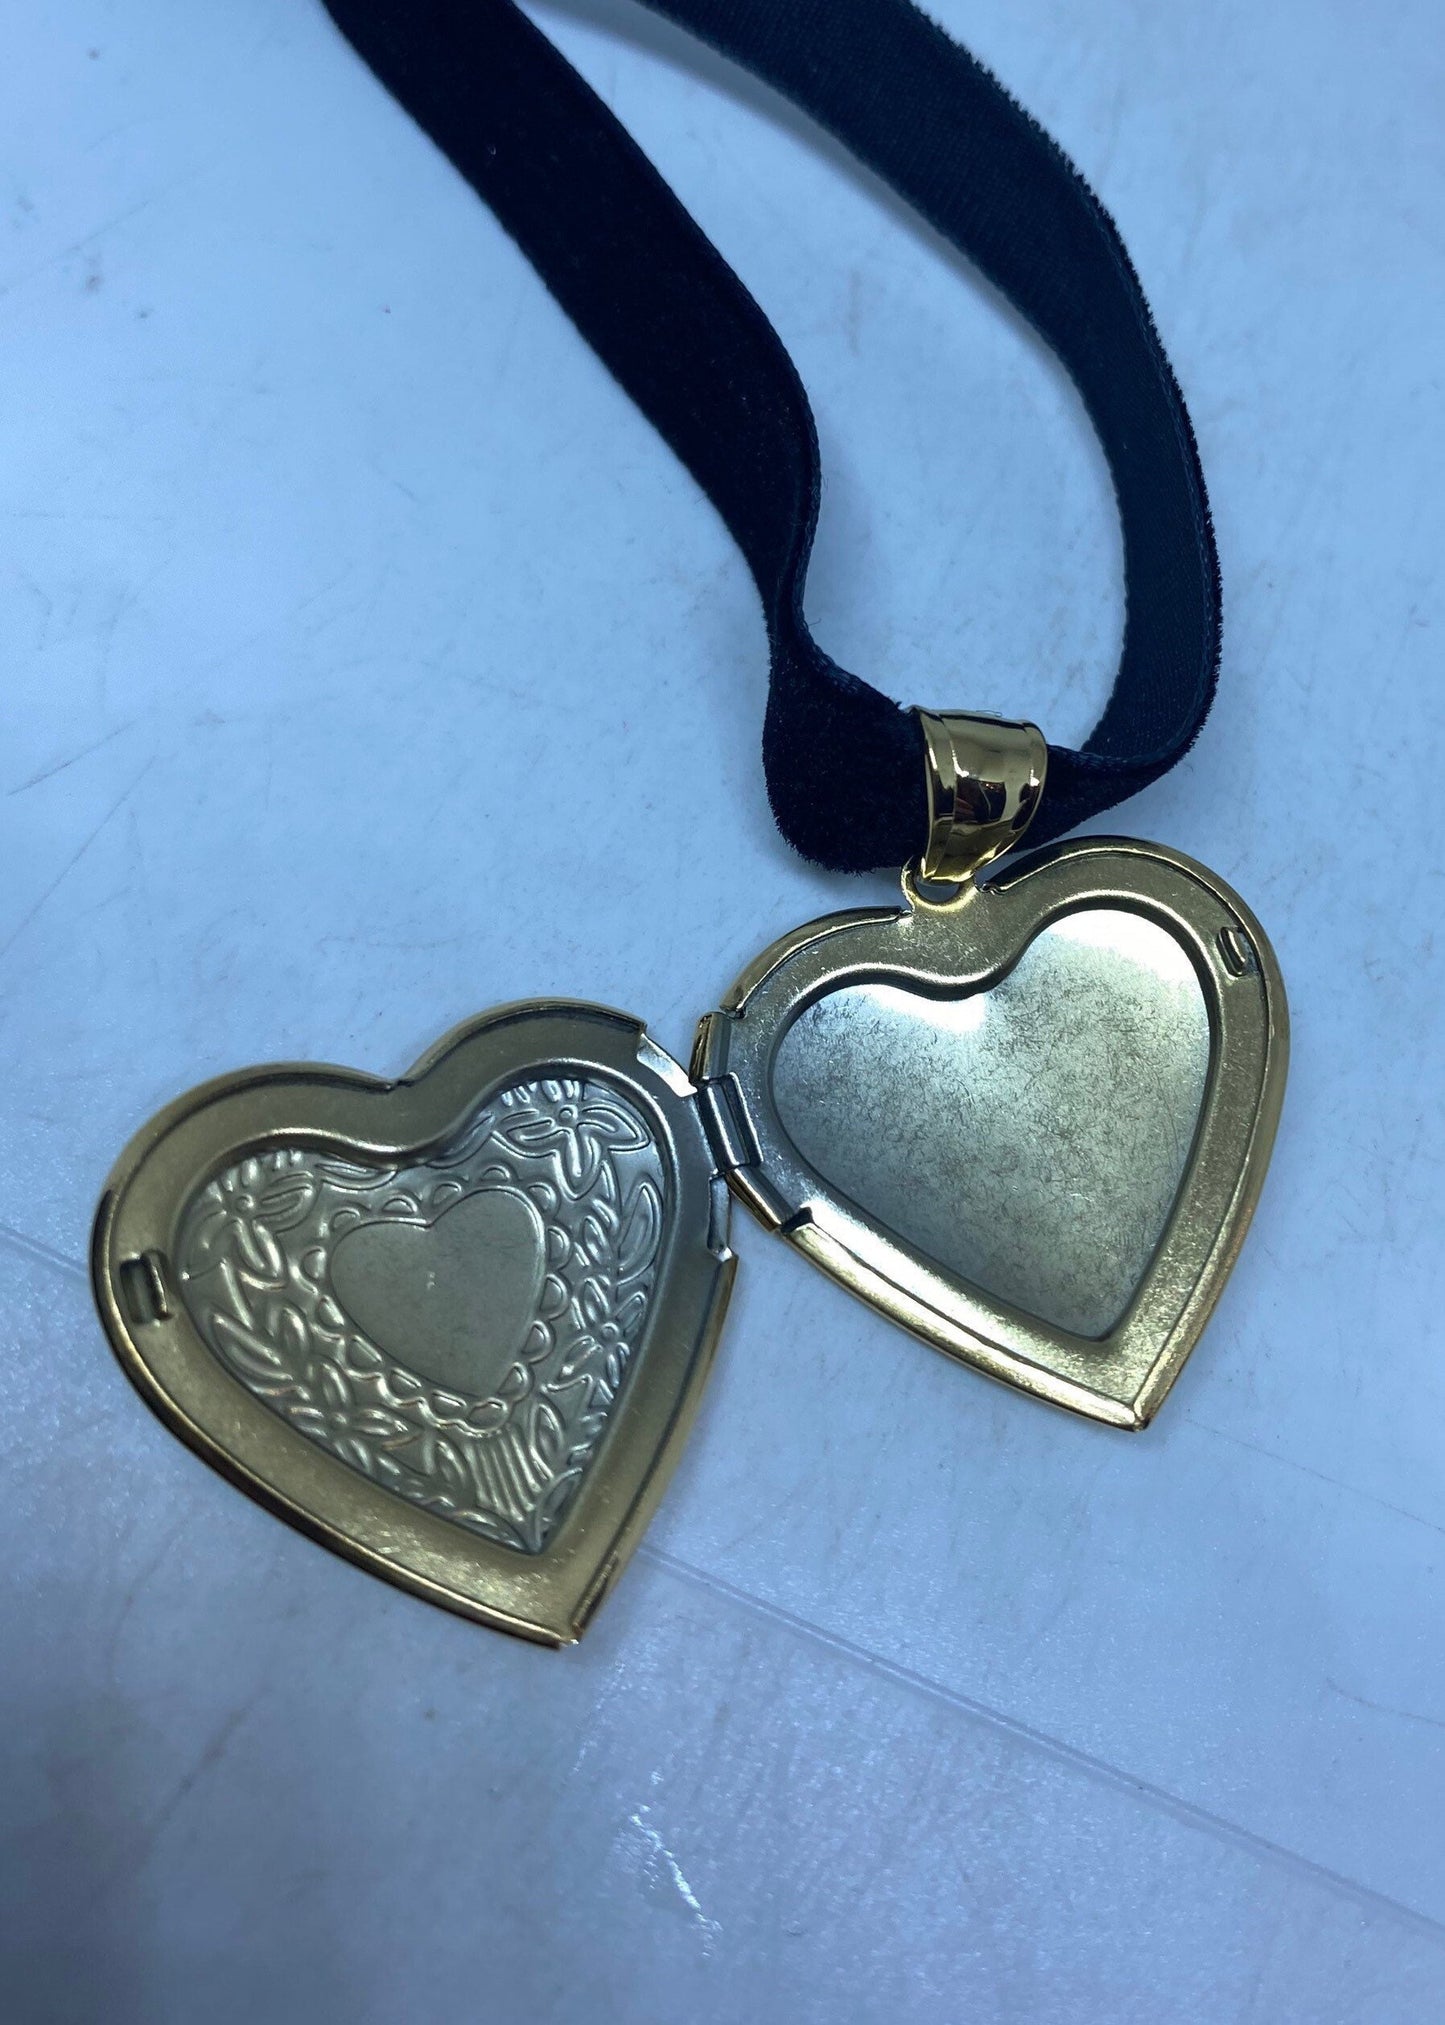 Vintage Gold Locket | Tiny Heart Photo Charm Golden Stainless Steel Deco Etched Choker Necklace